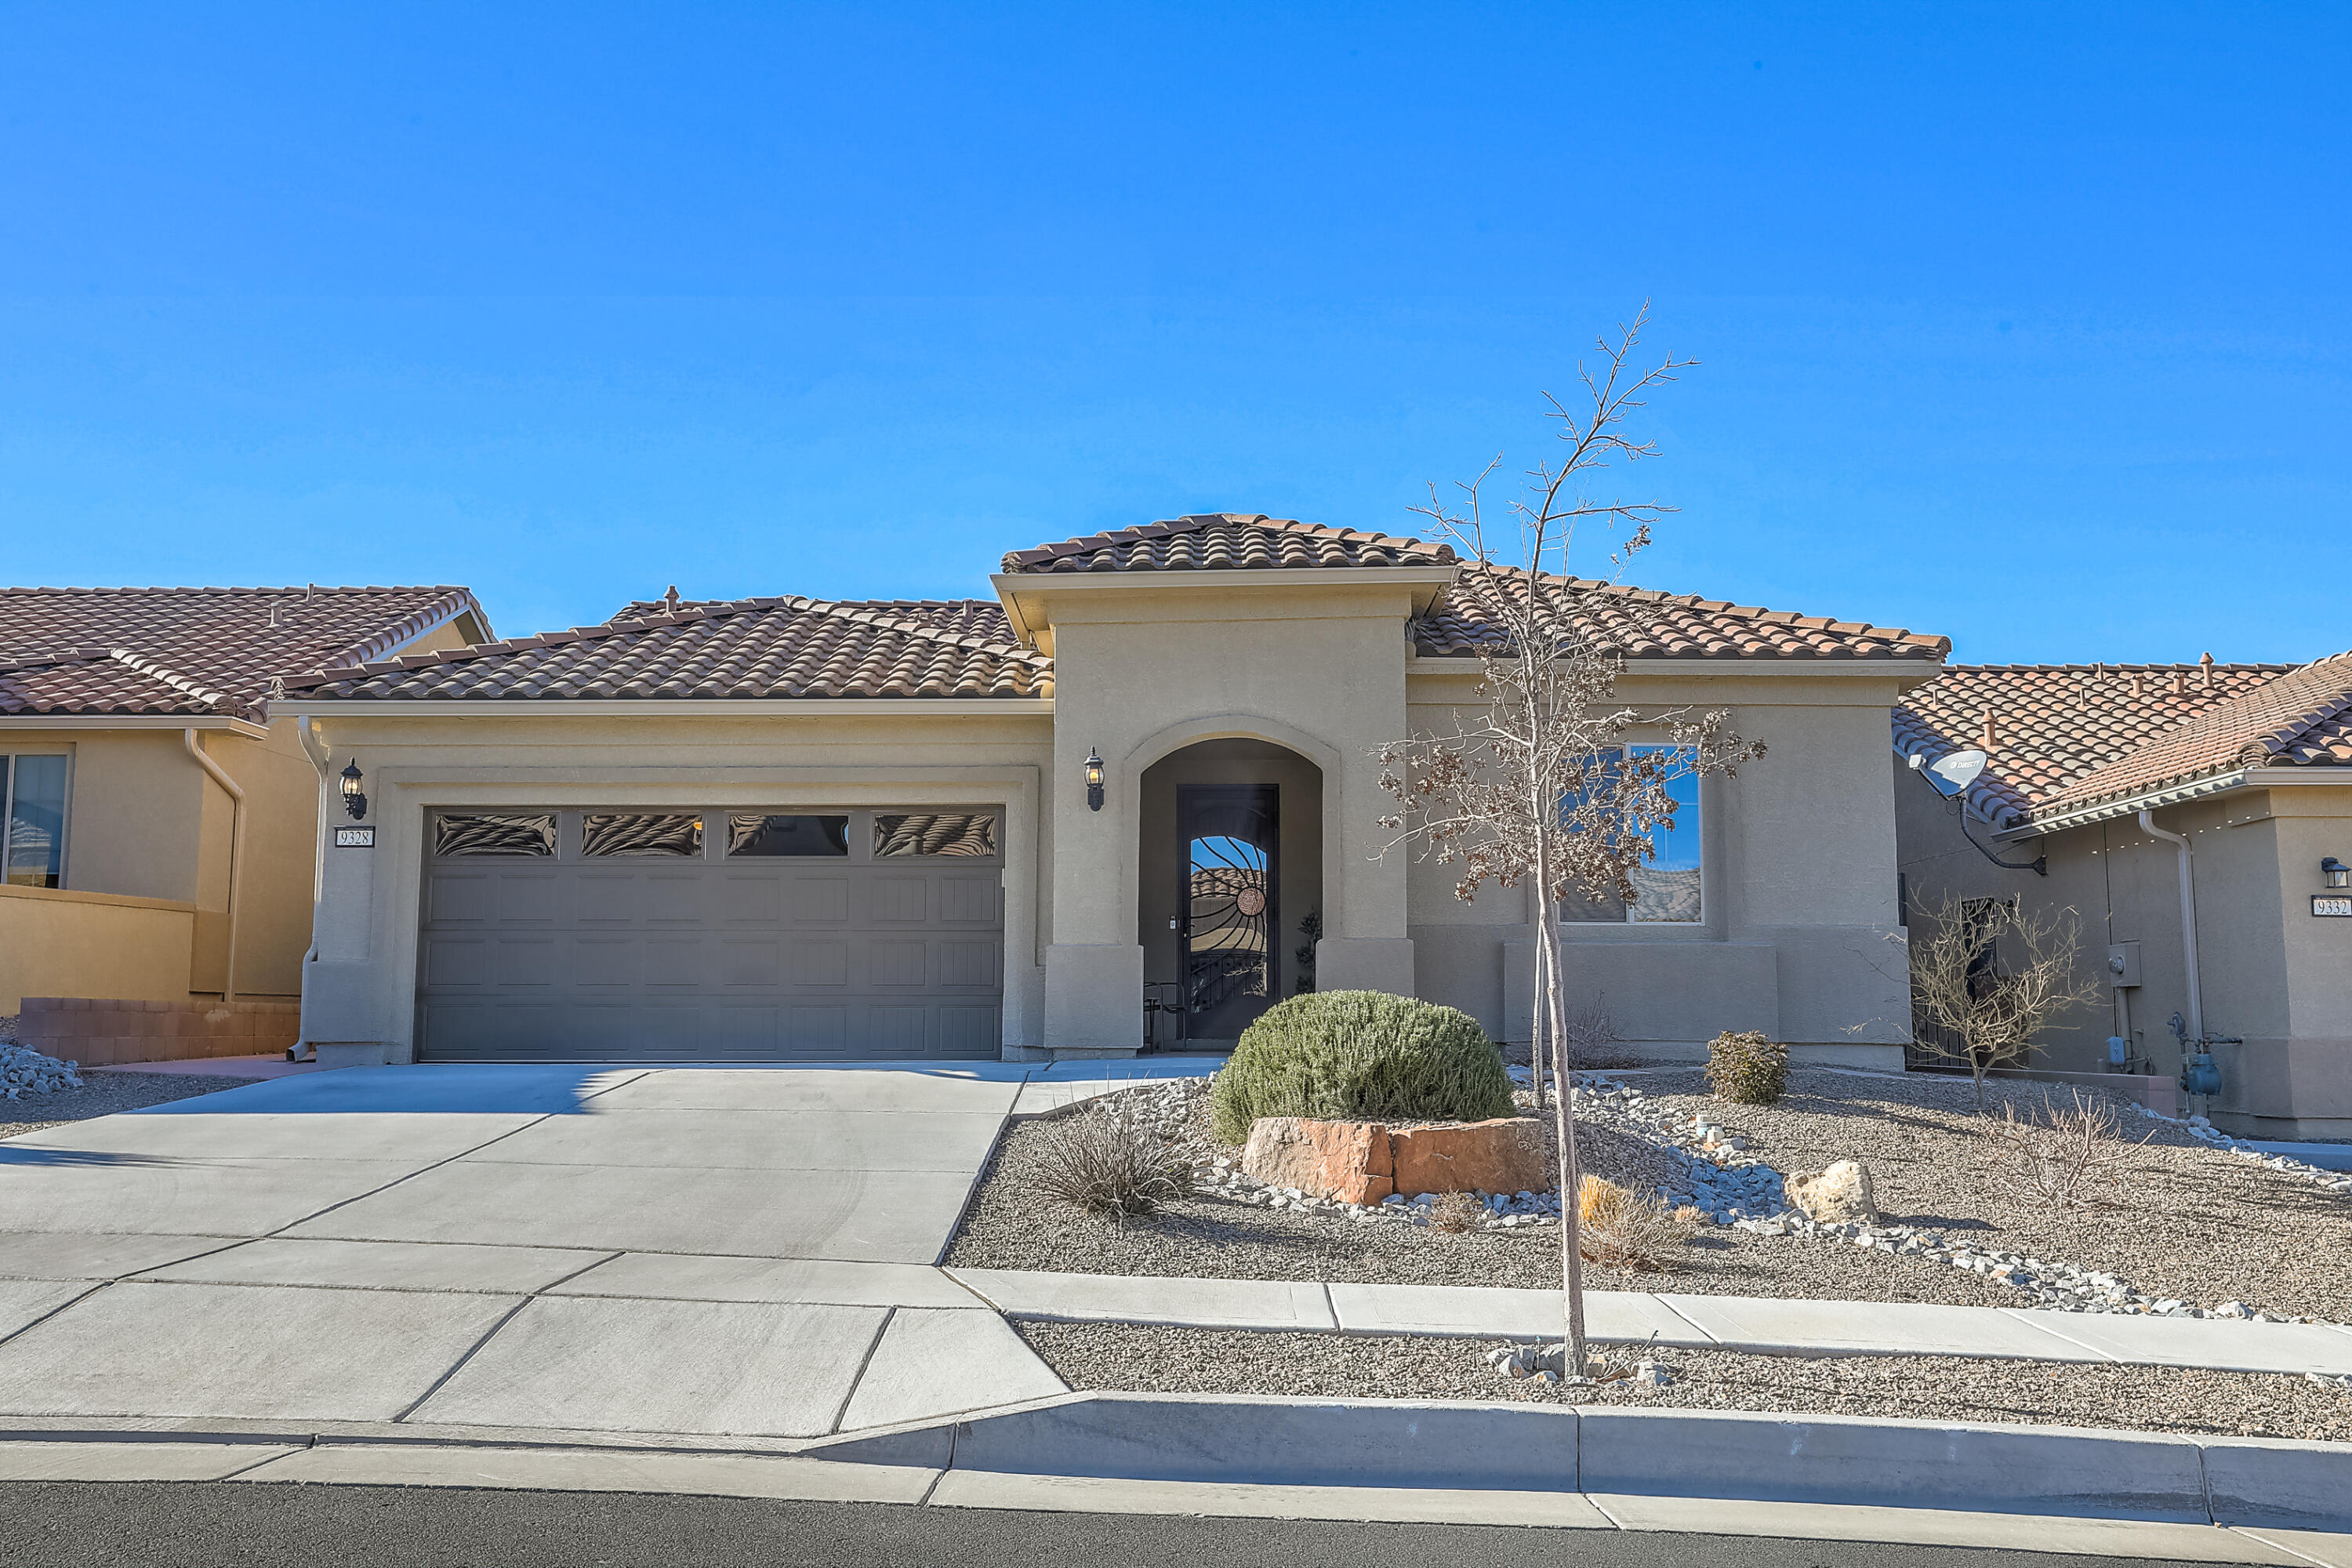 This Immaculate home in the Del Webb Active 55+ Adult Community at Mirehaven is like buying new construction but you get all the pluses with a fully landscaped yard and window treatments galore. This is the very popular Preserve Home with approx. 2048 SF, 2BR's, 2 BA's, Office/Den, Large Gathering and Dining Area, Over-sized 2 Car Garage w/4 Ft Extension and windows in the garage door w/ overhead storage units in garage and a custom security door inside garage door.Over $100,000 Plus ++ in upgrades and improvements will Wow you when you come in to see what this house has. You will love the open concept which has: Beautiful front security door (glass and screen option), trey ceilings in entry and office, French doors on office, Chef Lux Kitchen package that includes: Stainless Steel